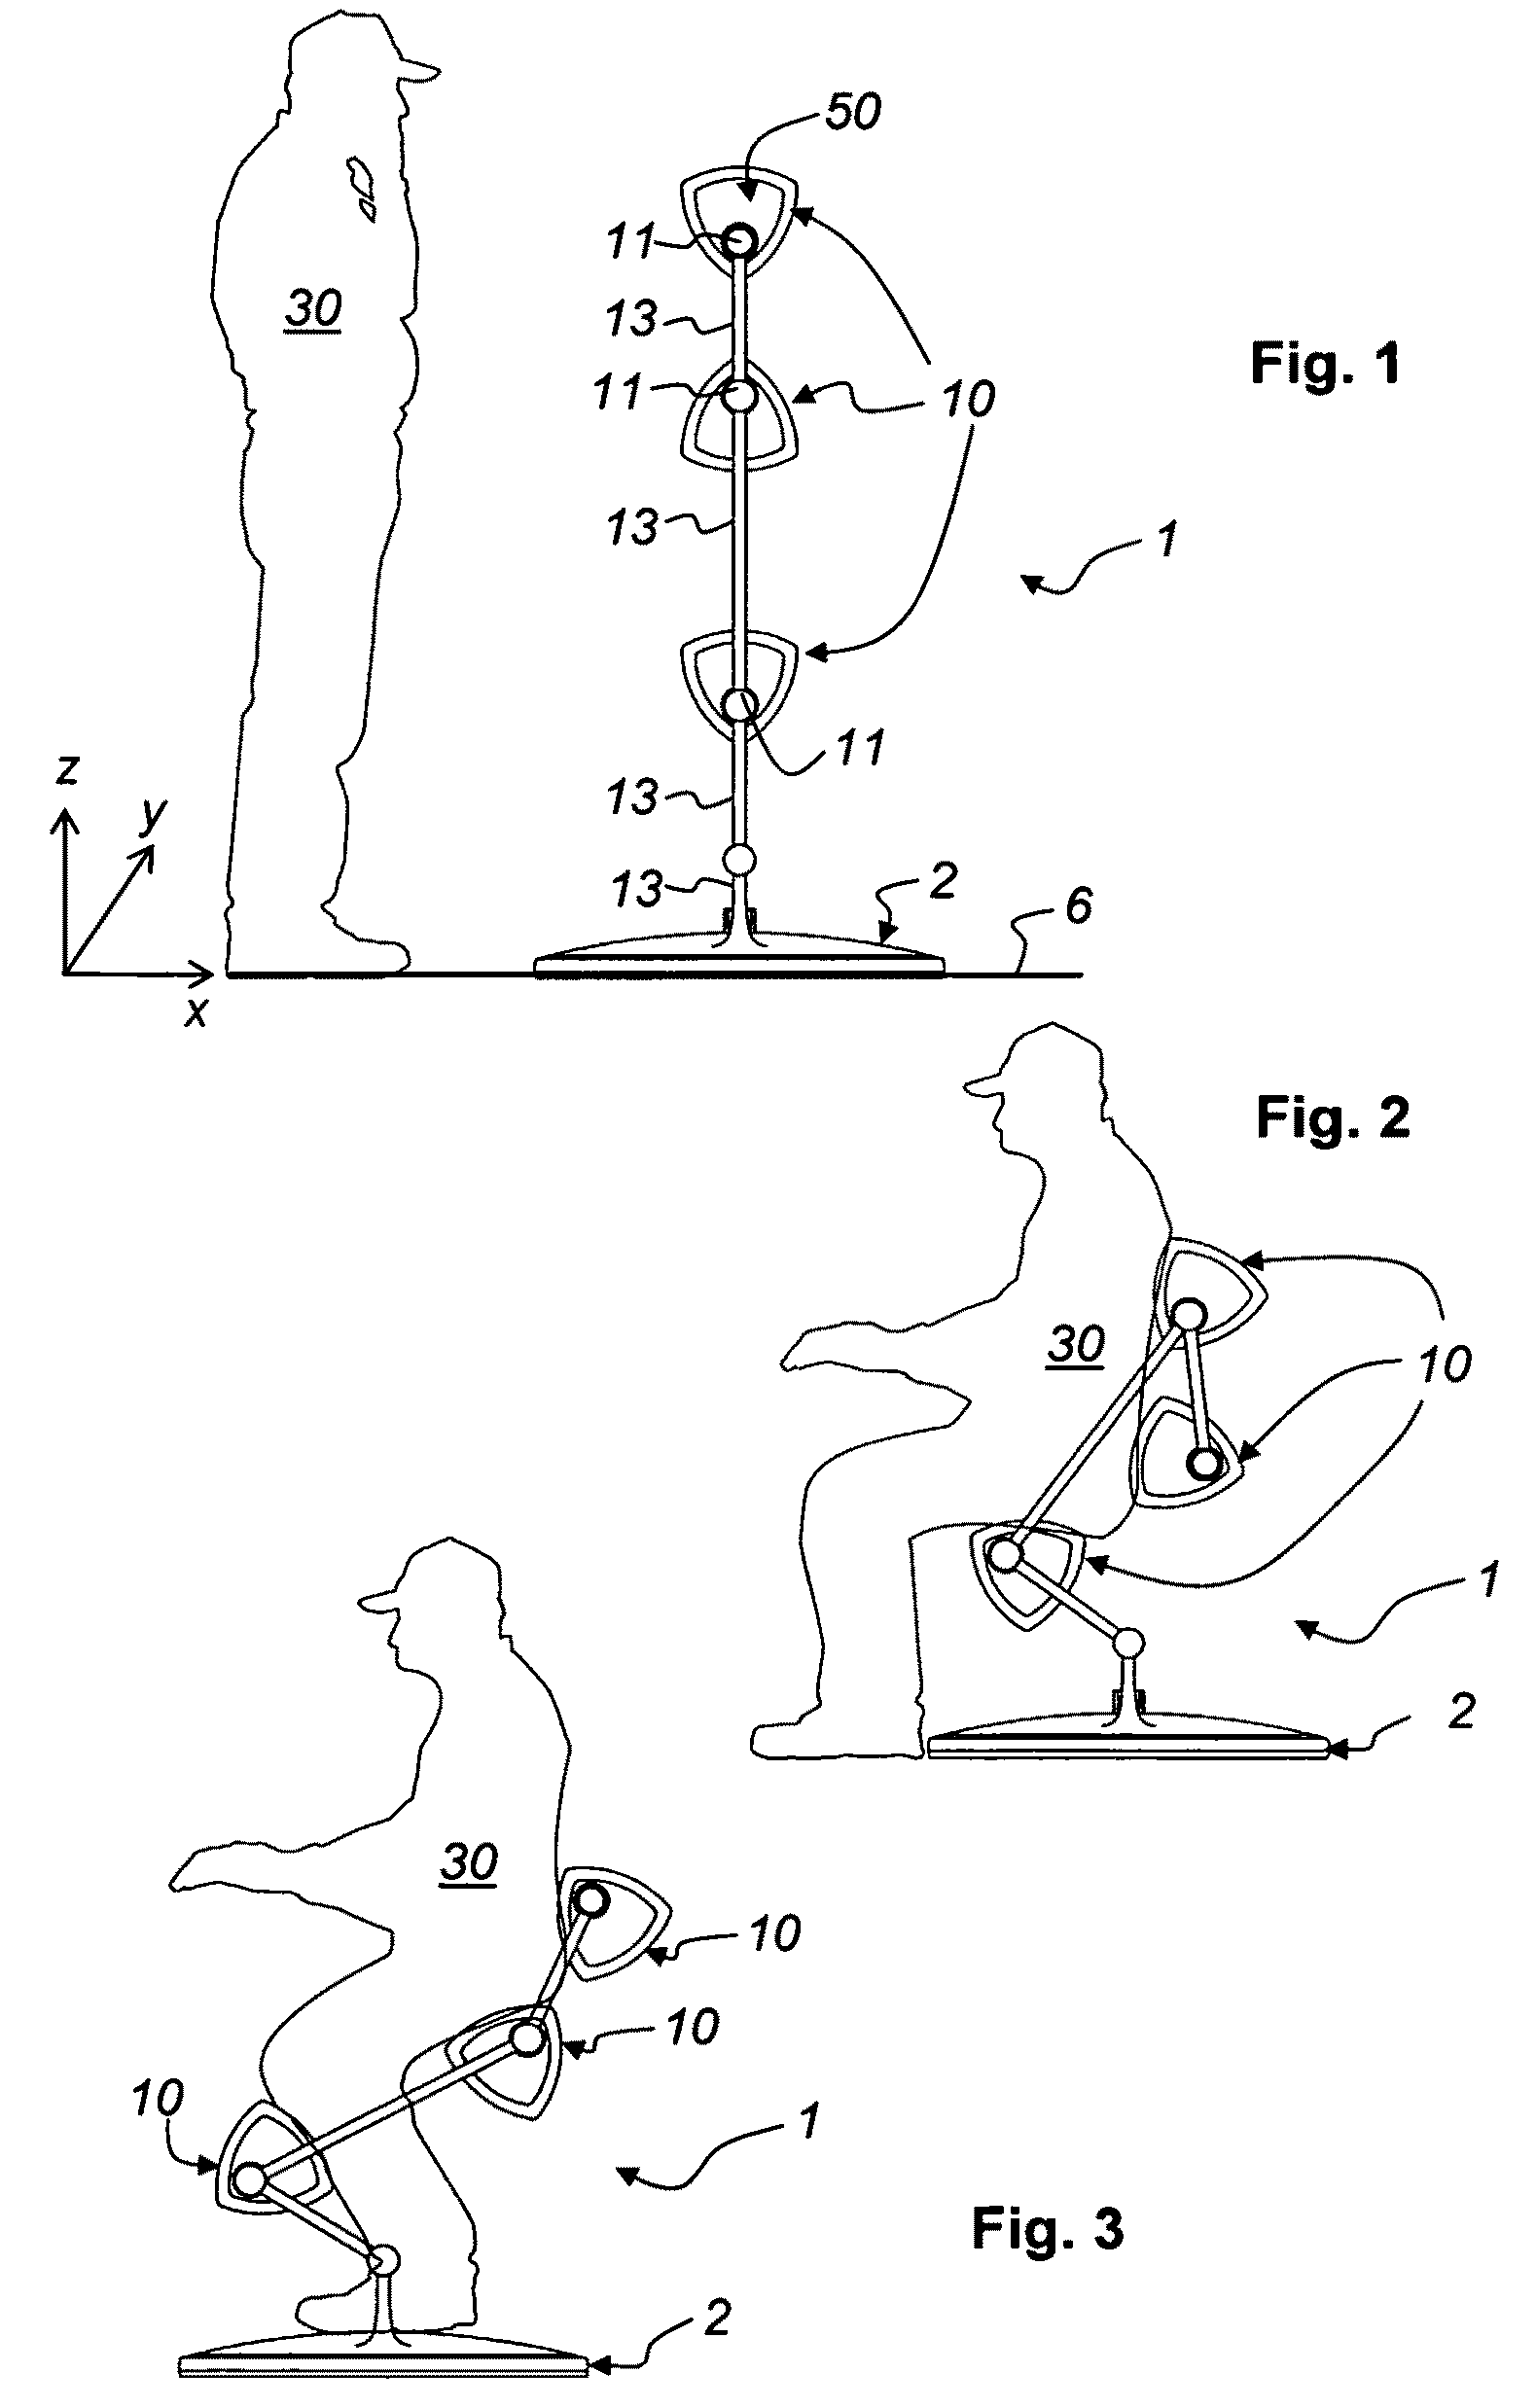 Device for supporting a human body in various positions